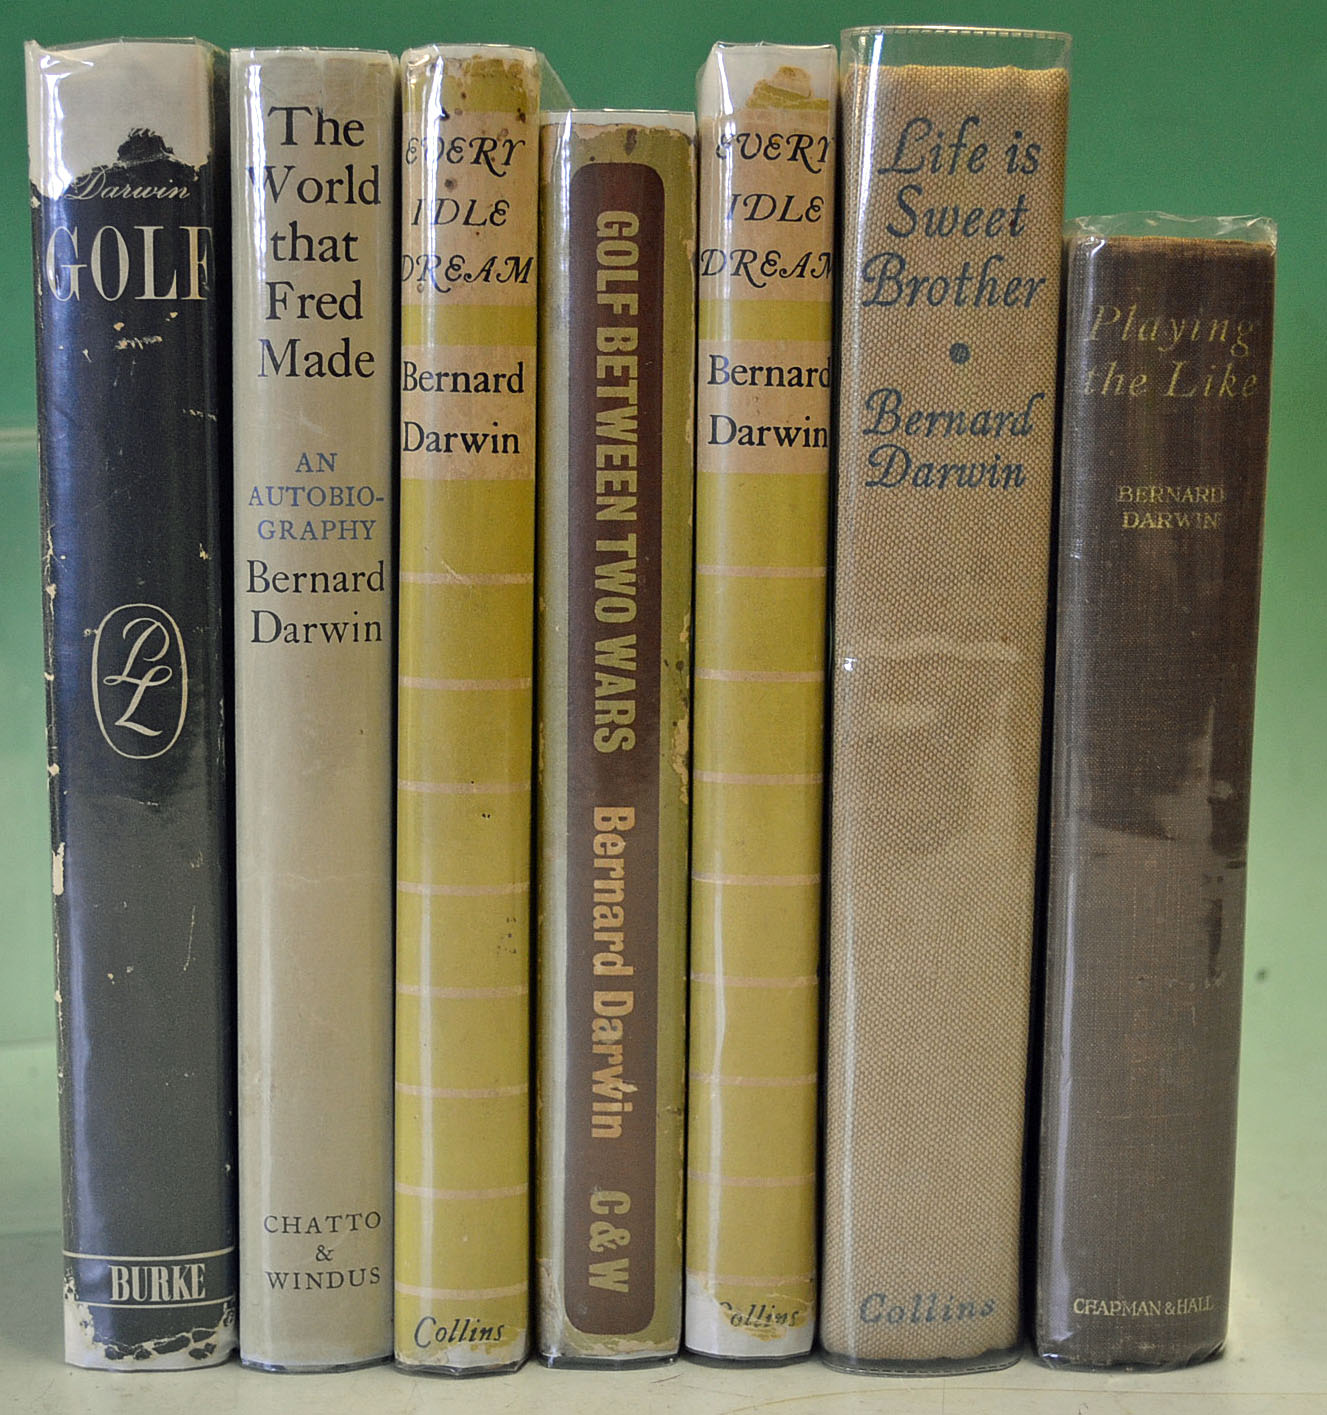 Darwin, Bernard collection (7) - titles incl 2x Every Idle Dream, The World That Fred Made, Golf